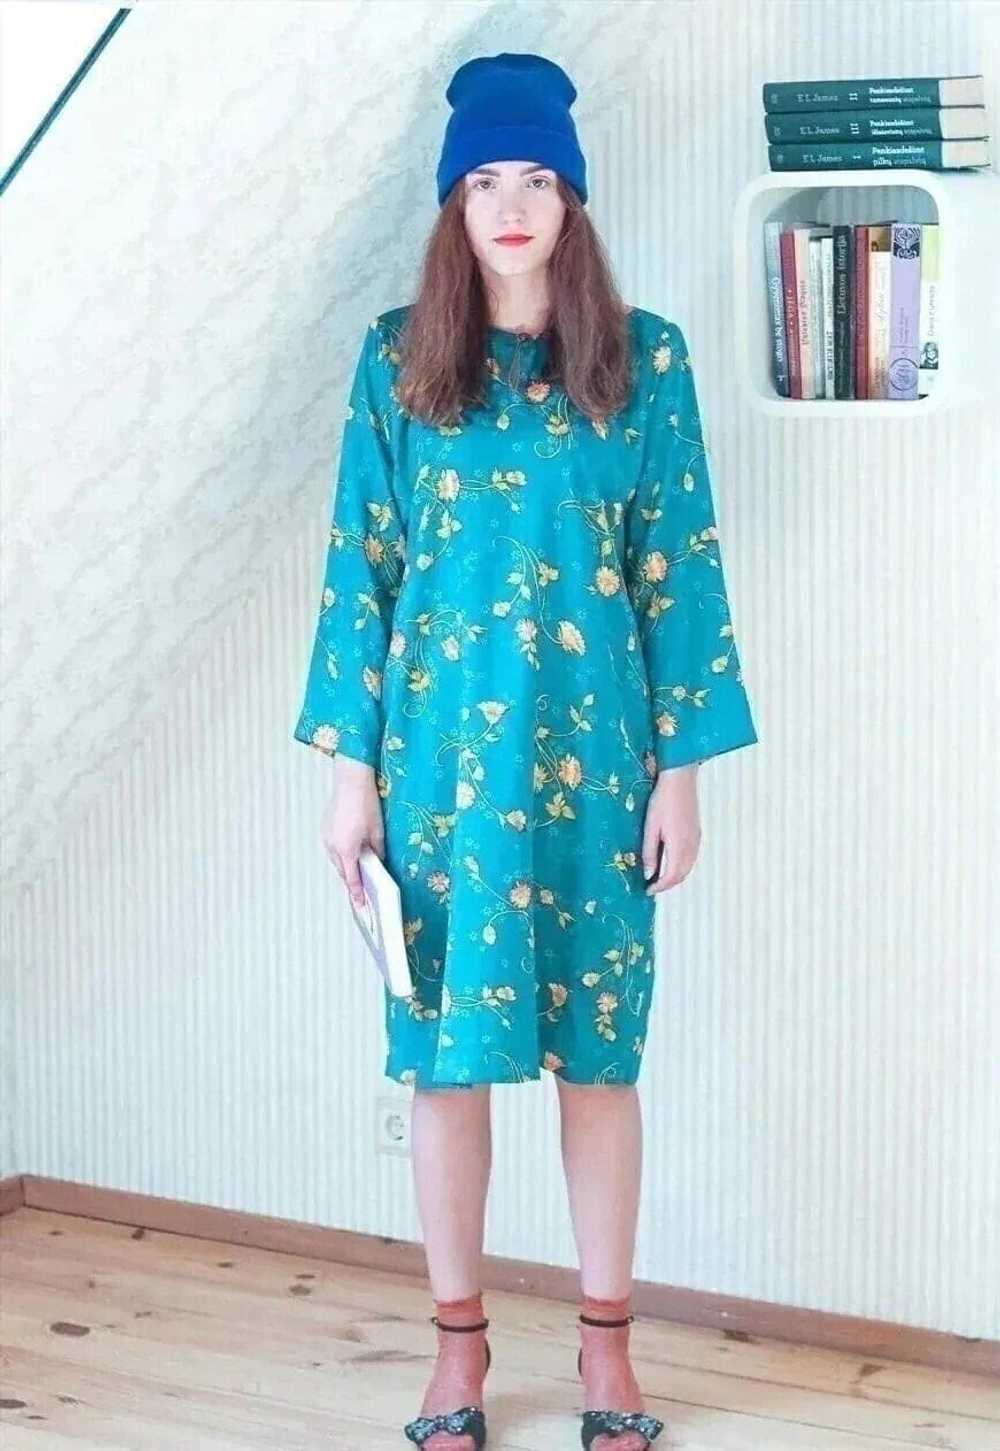 Bright teal blue long sleeve silky floral dress - image 1